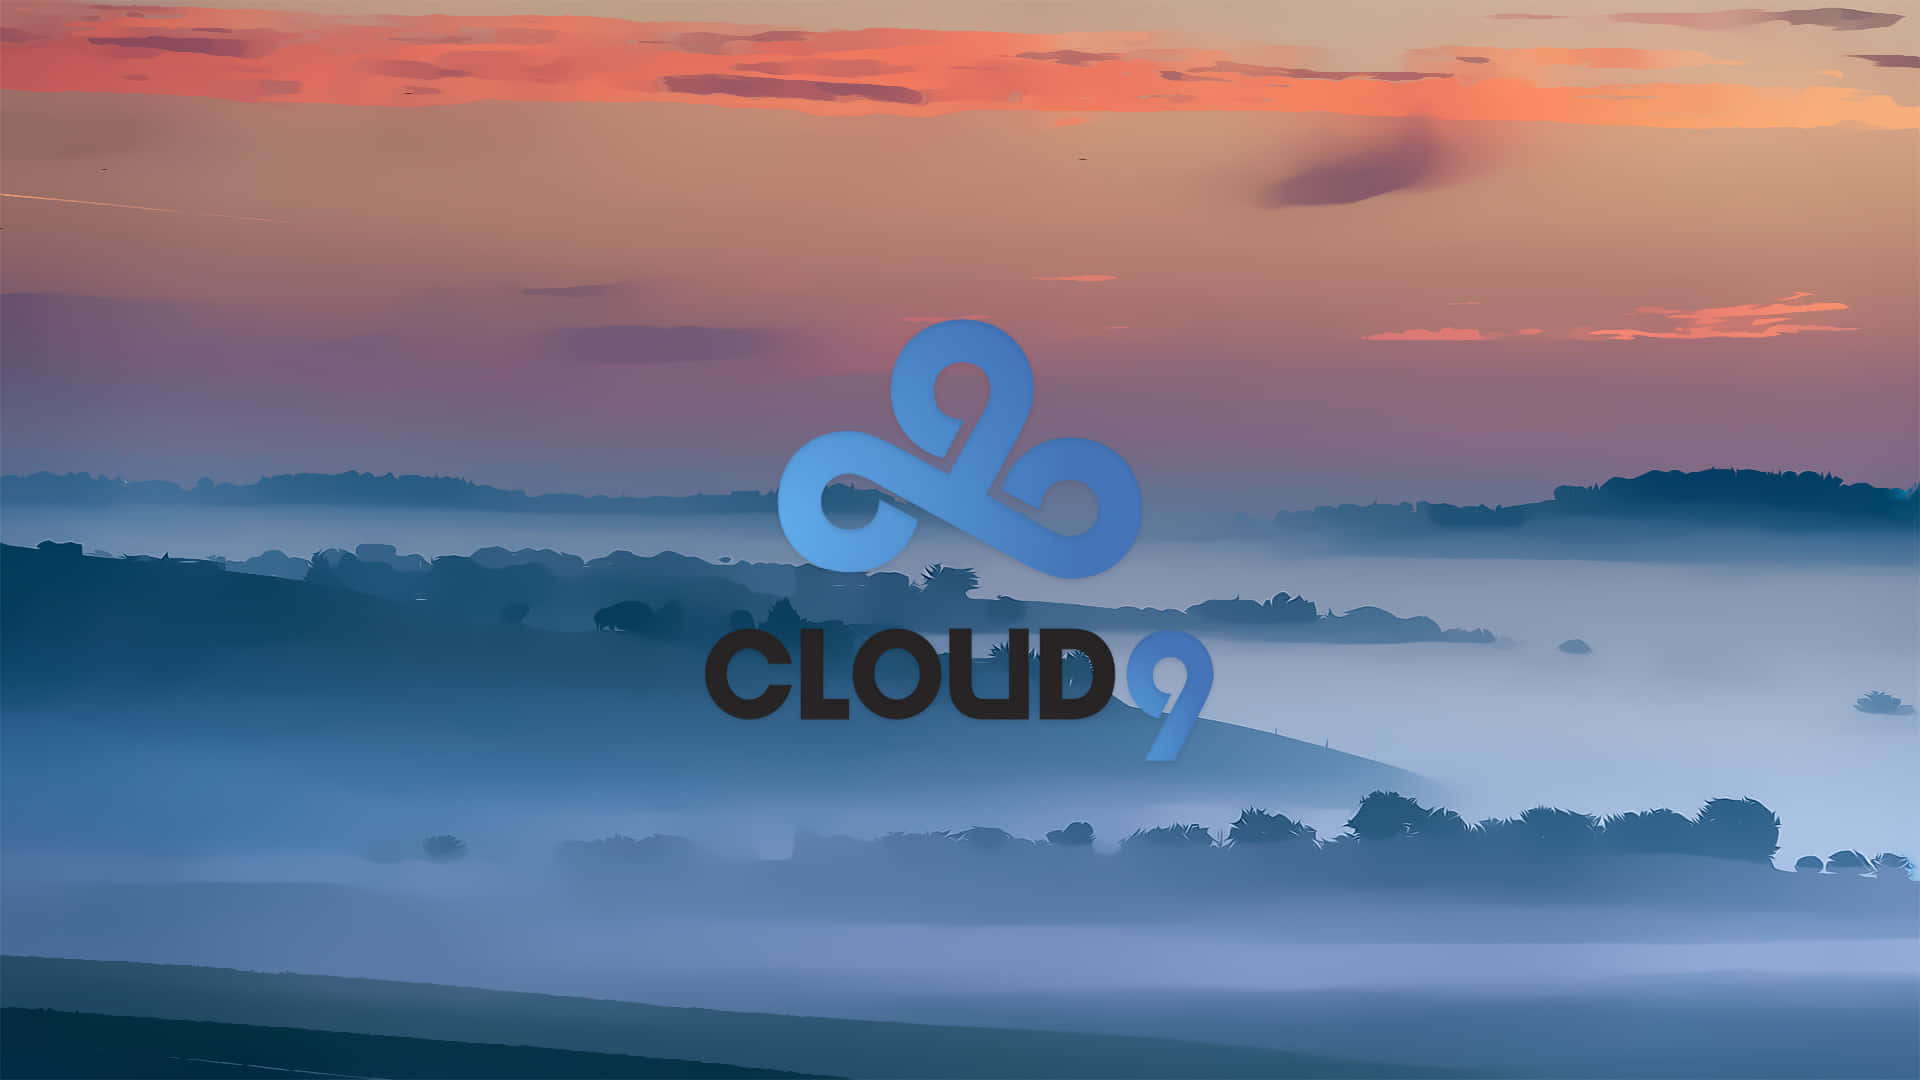 Relax and Recharge at Cloud 9 Wallpaper